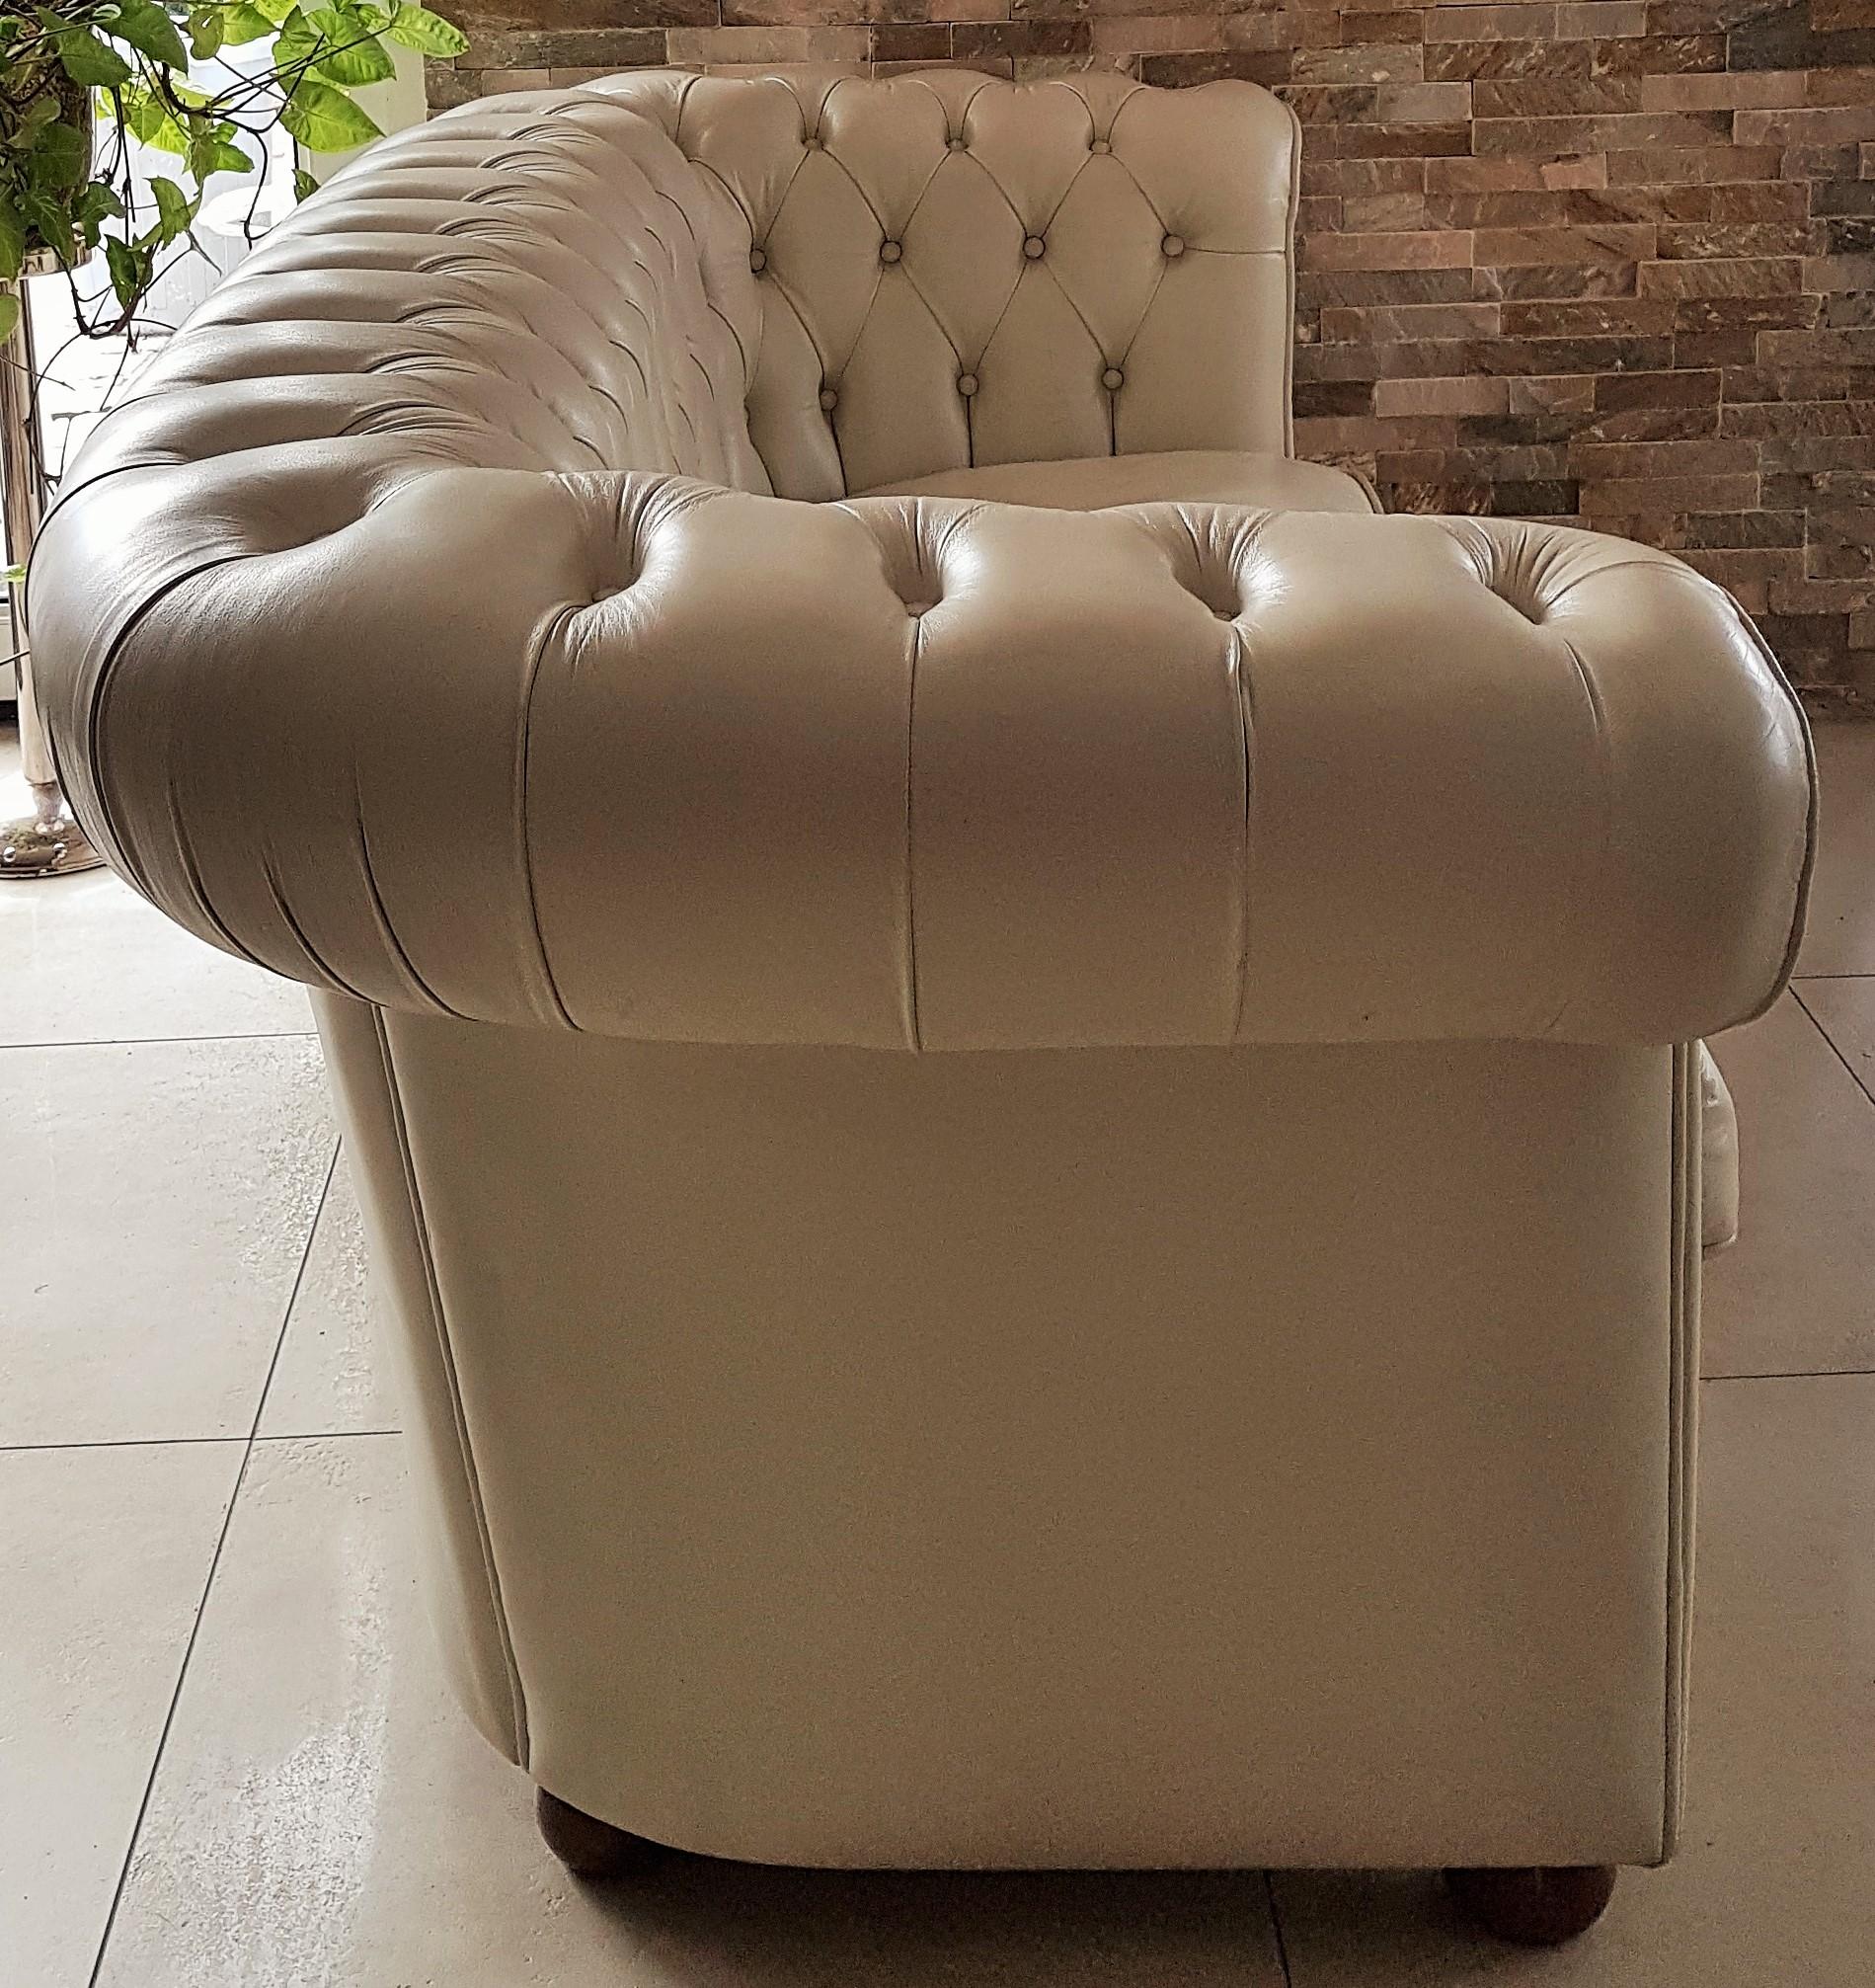 Midcentury Chesterfield Sofa Loveseat White Leather In Good Condition For Sale In Saarbruecken, DE